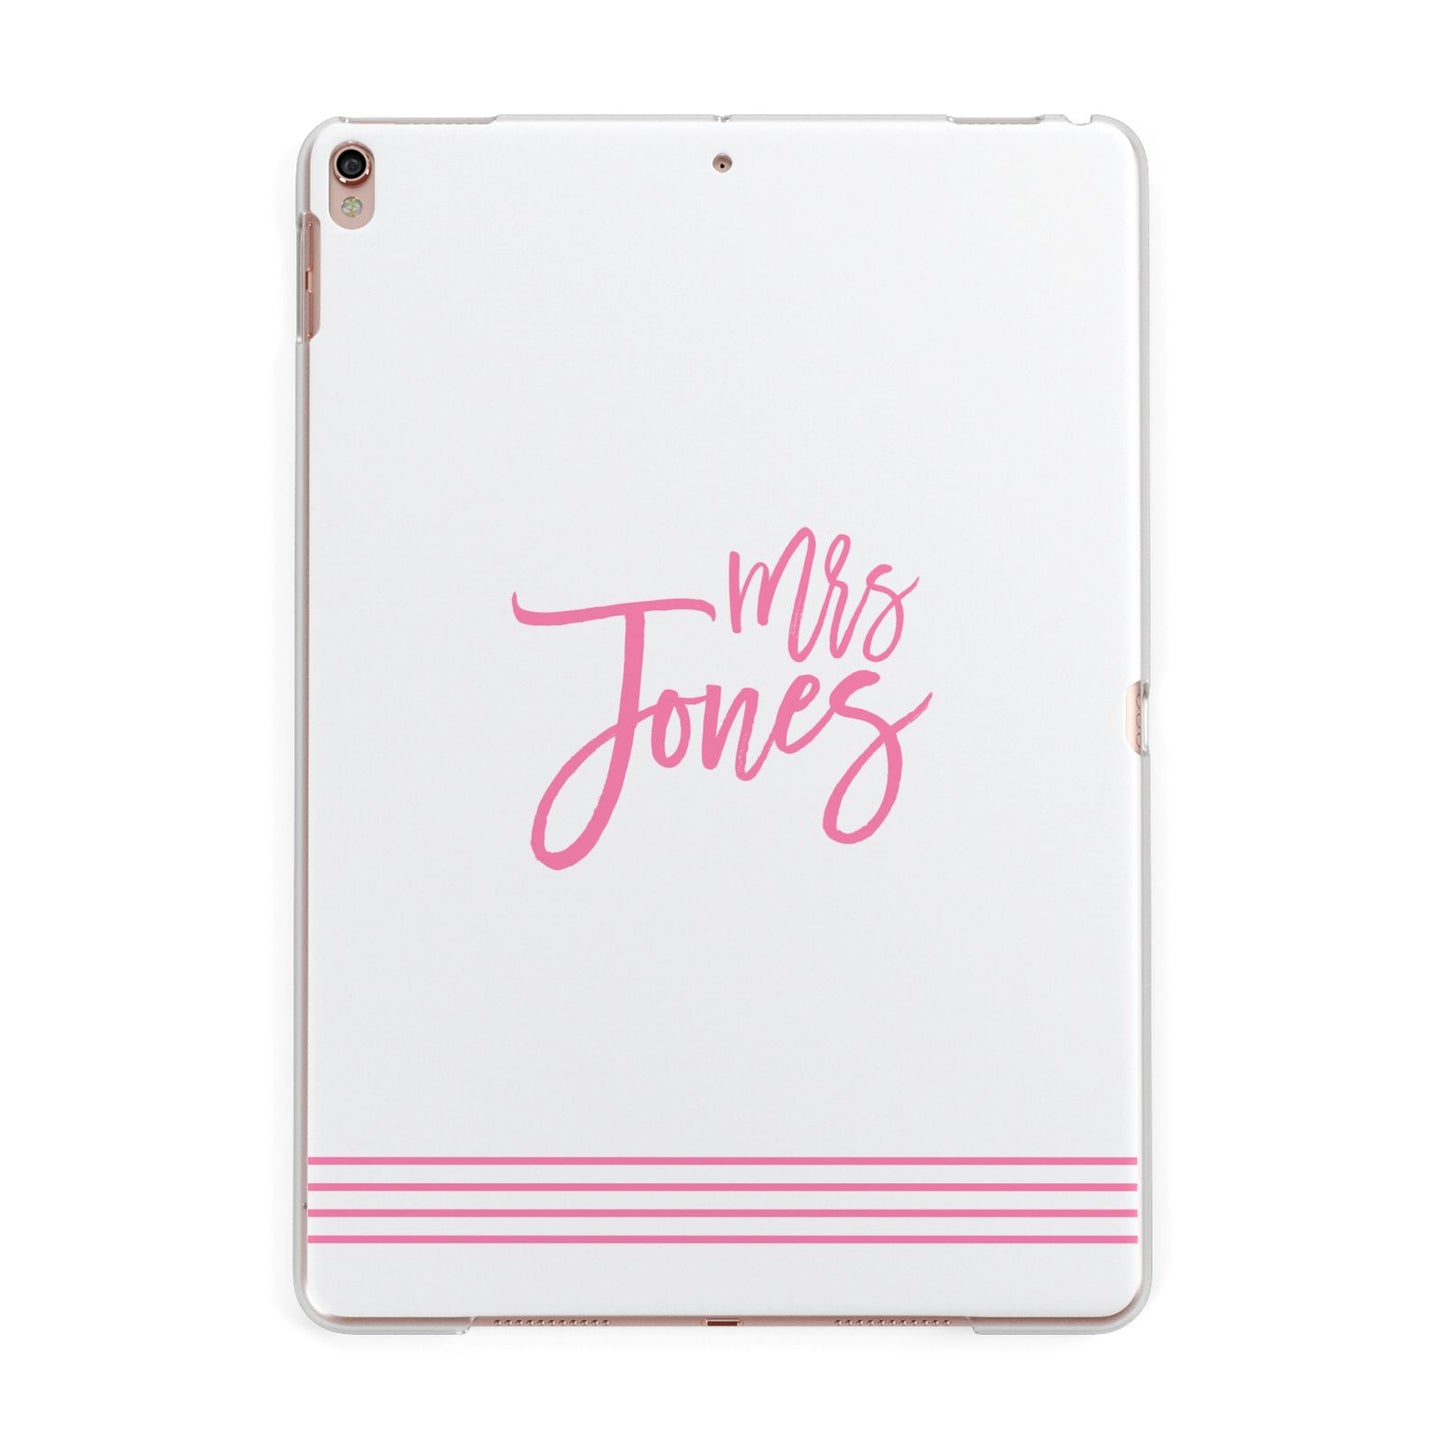 Personalised Hers Apple iPad Rose Gold Case